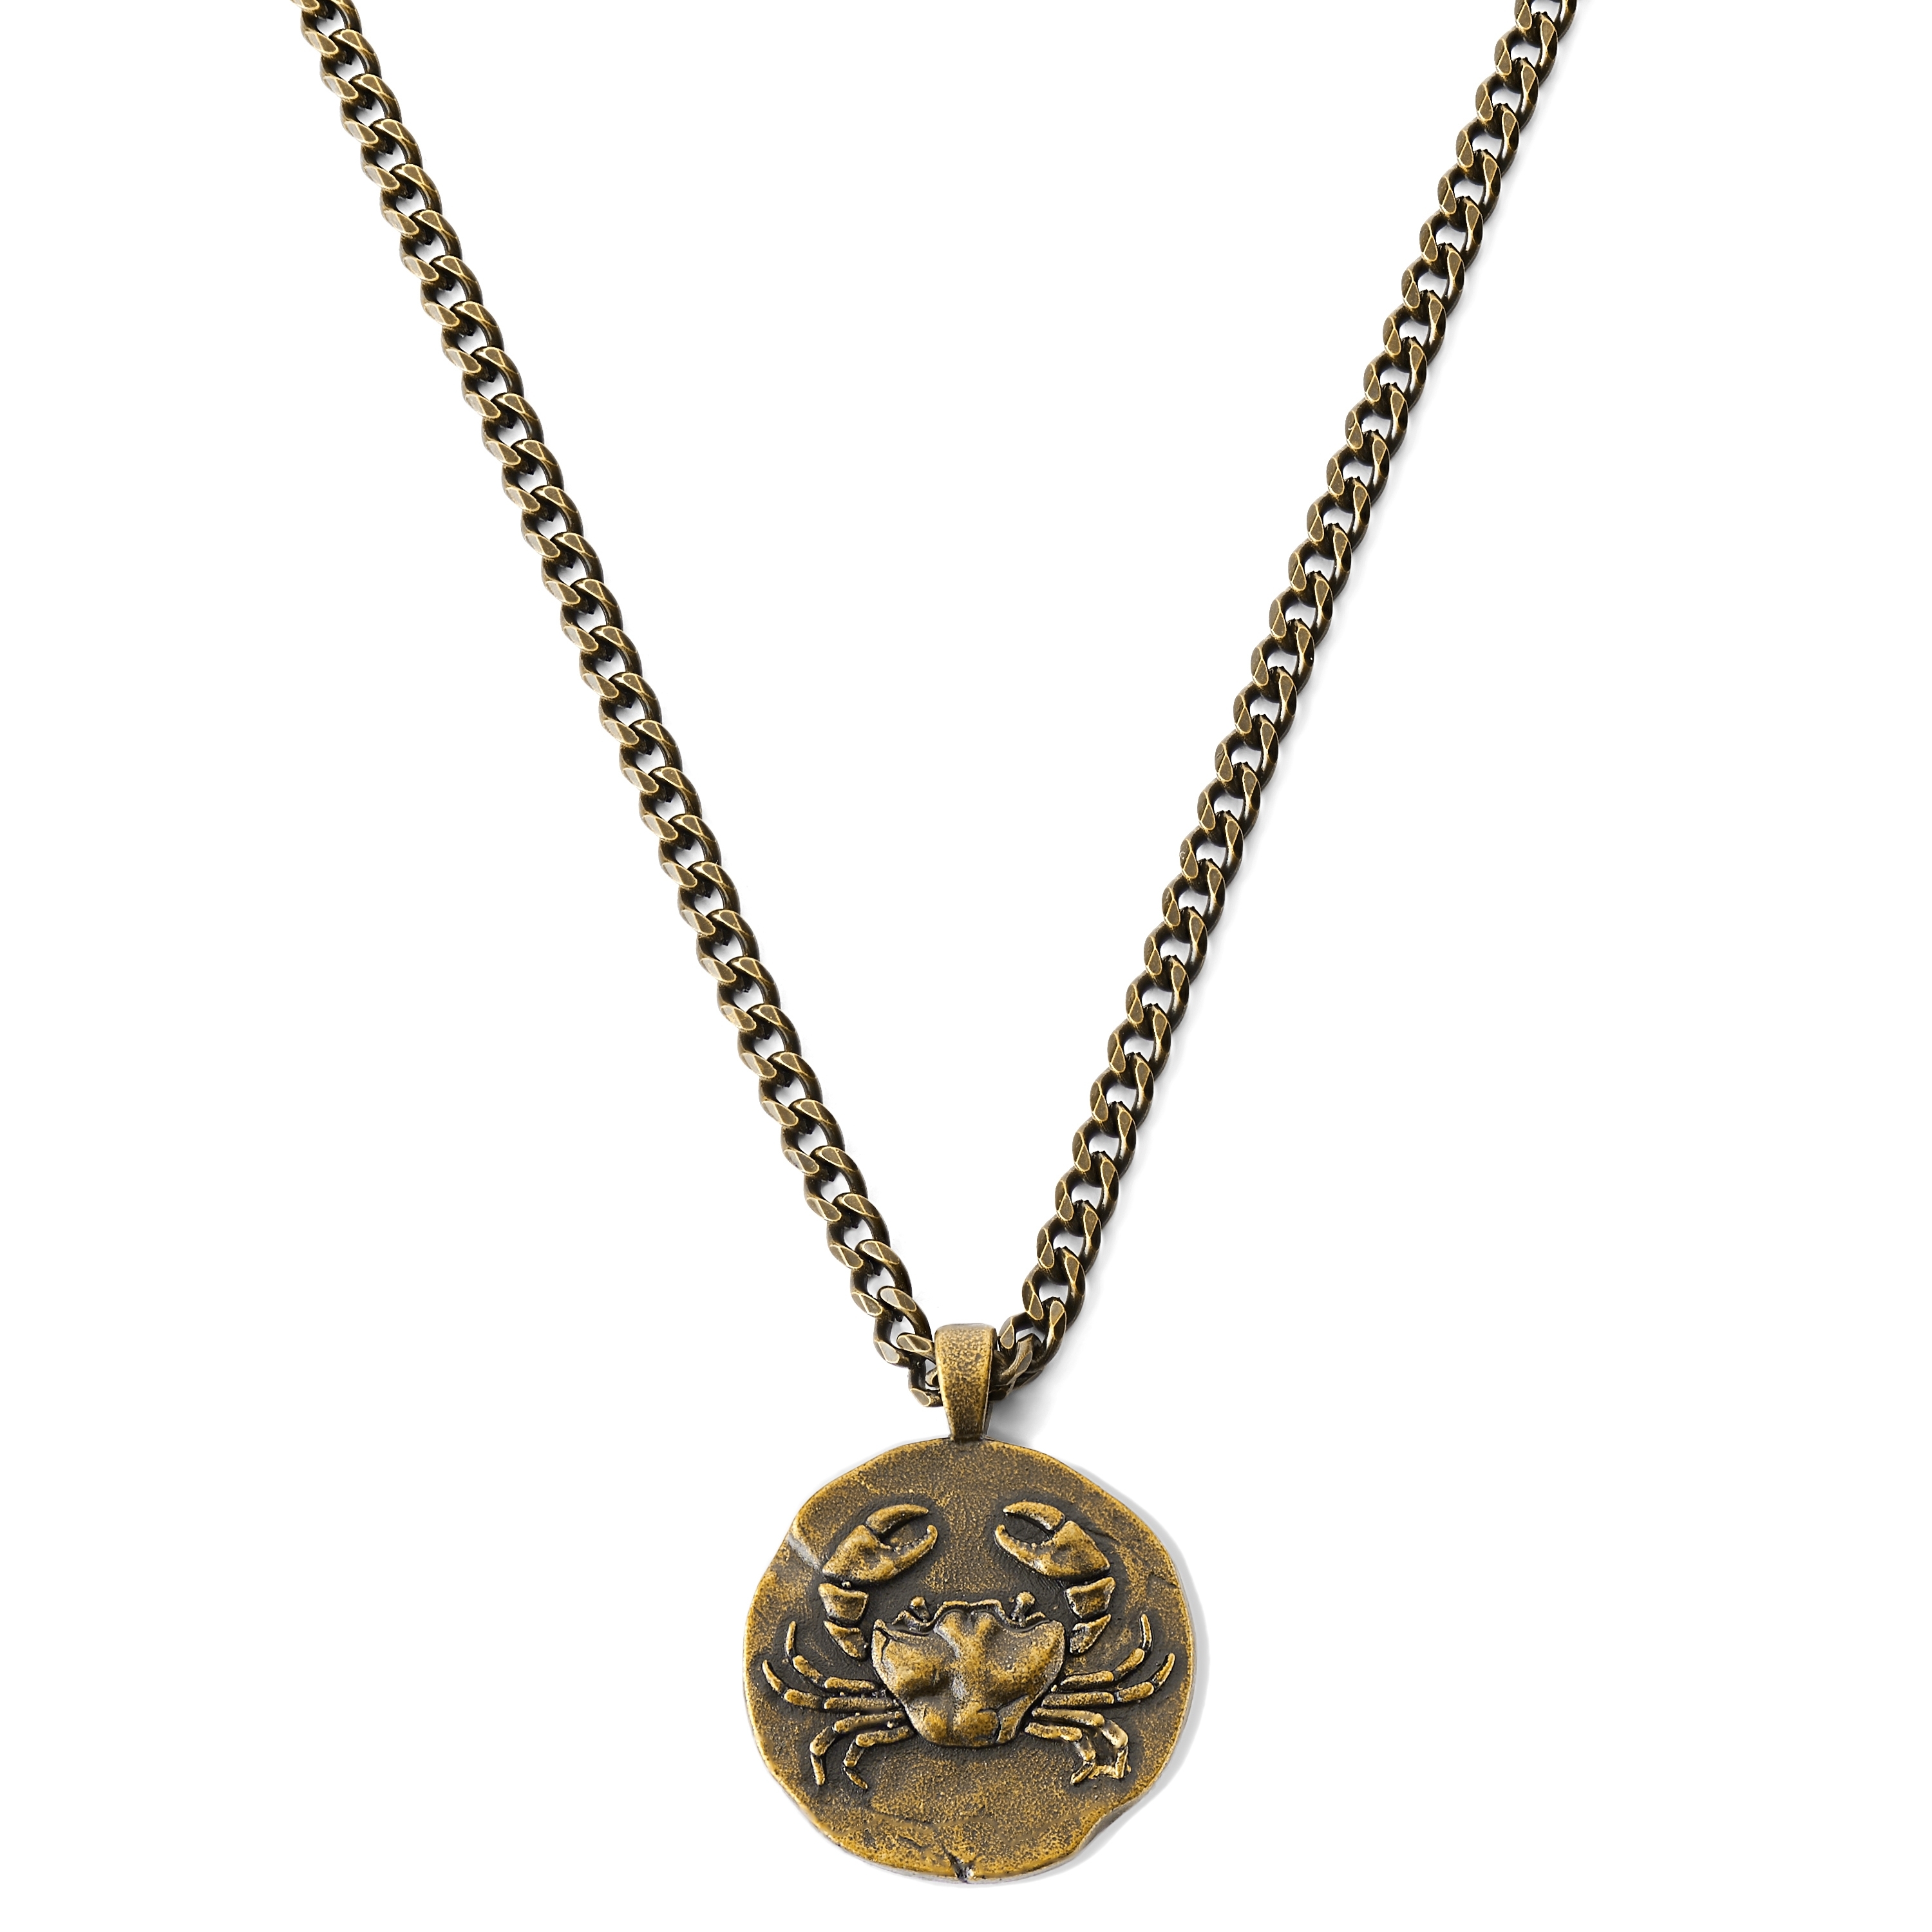 Cancer Zodiac Necklace In Yellow Gold - Eliza Wills Jewellery